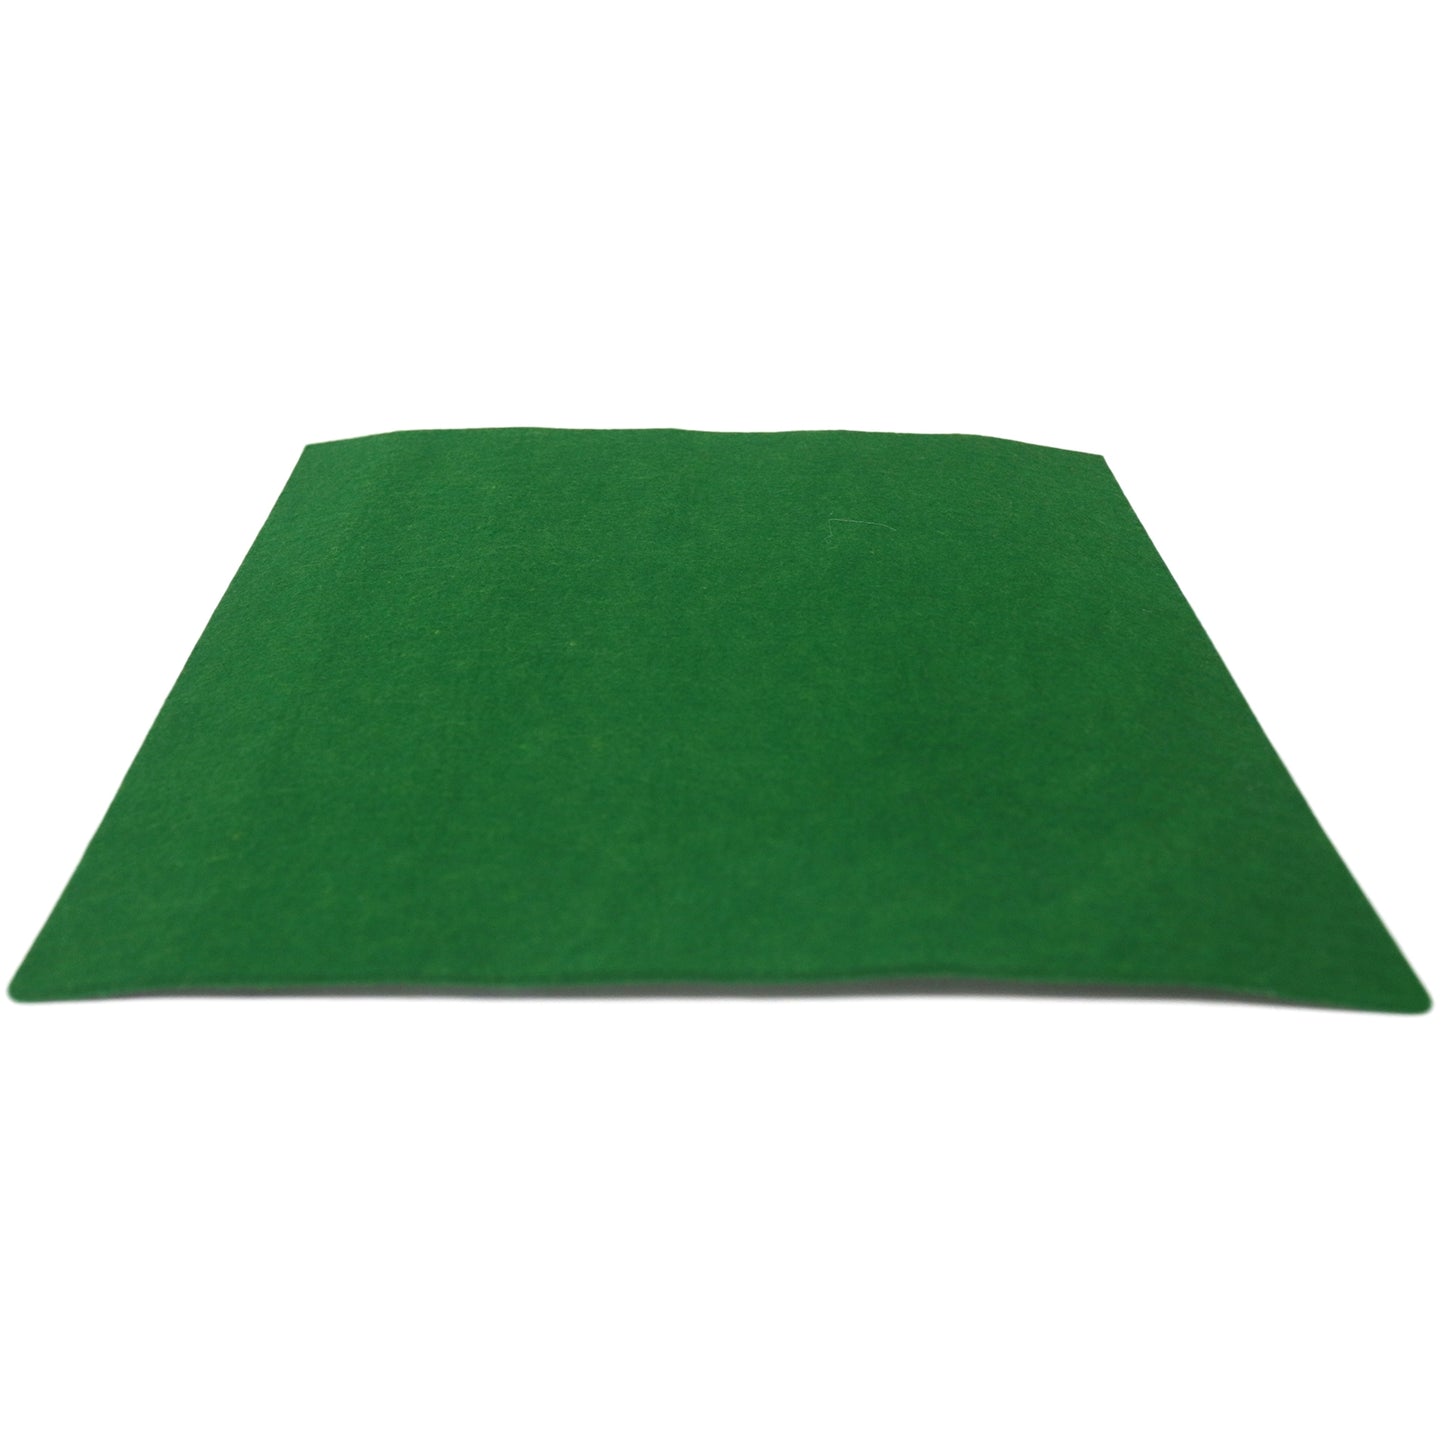 Reptile Soft and Absorbent Carpet Mat